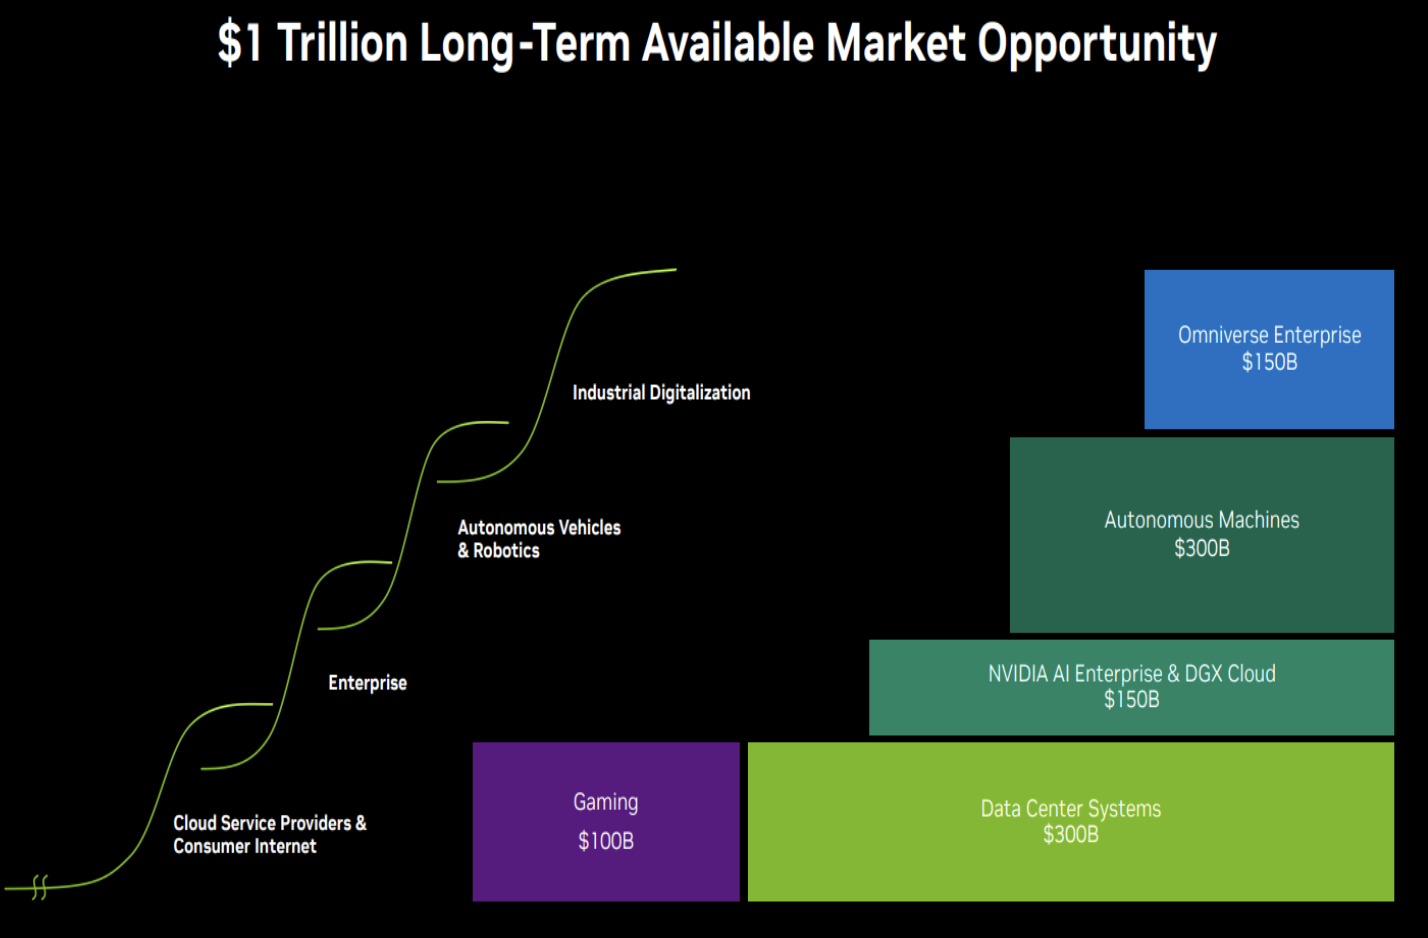 4 opportunities for growth - nvidia shares